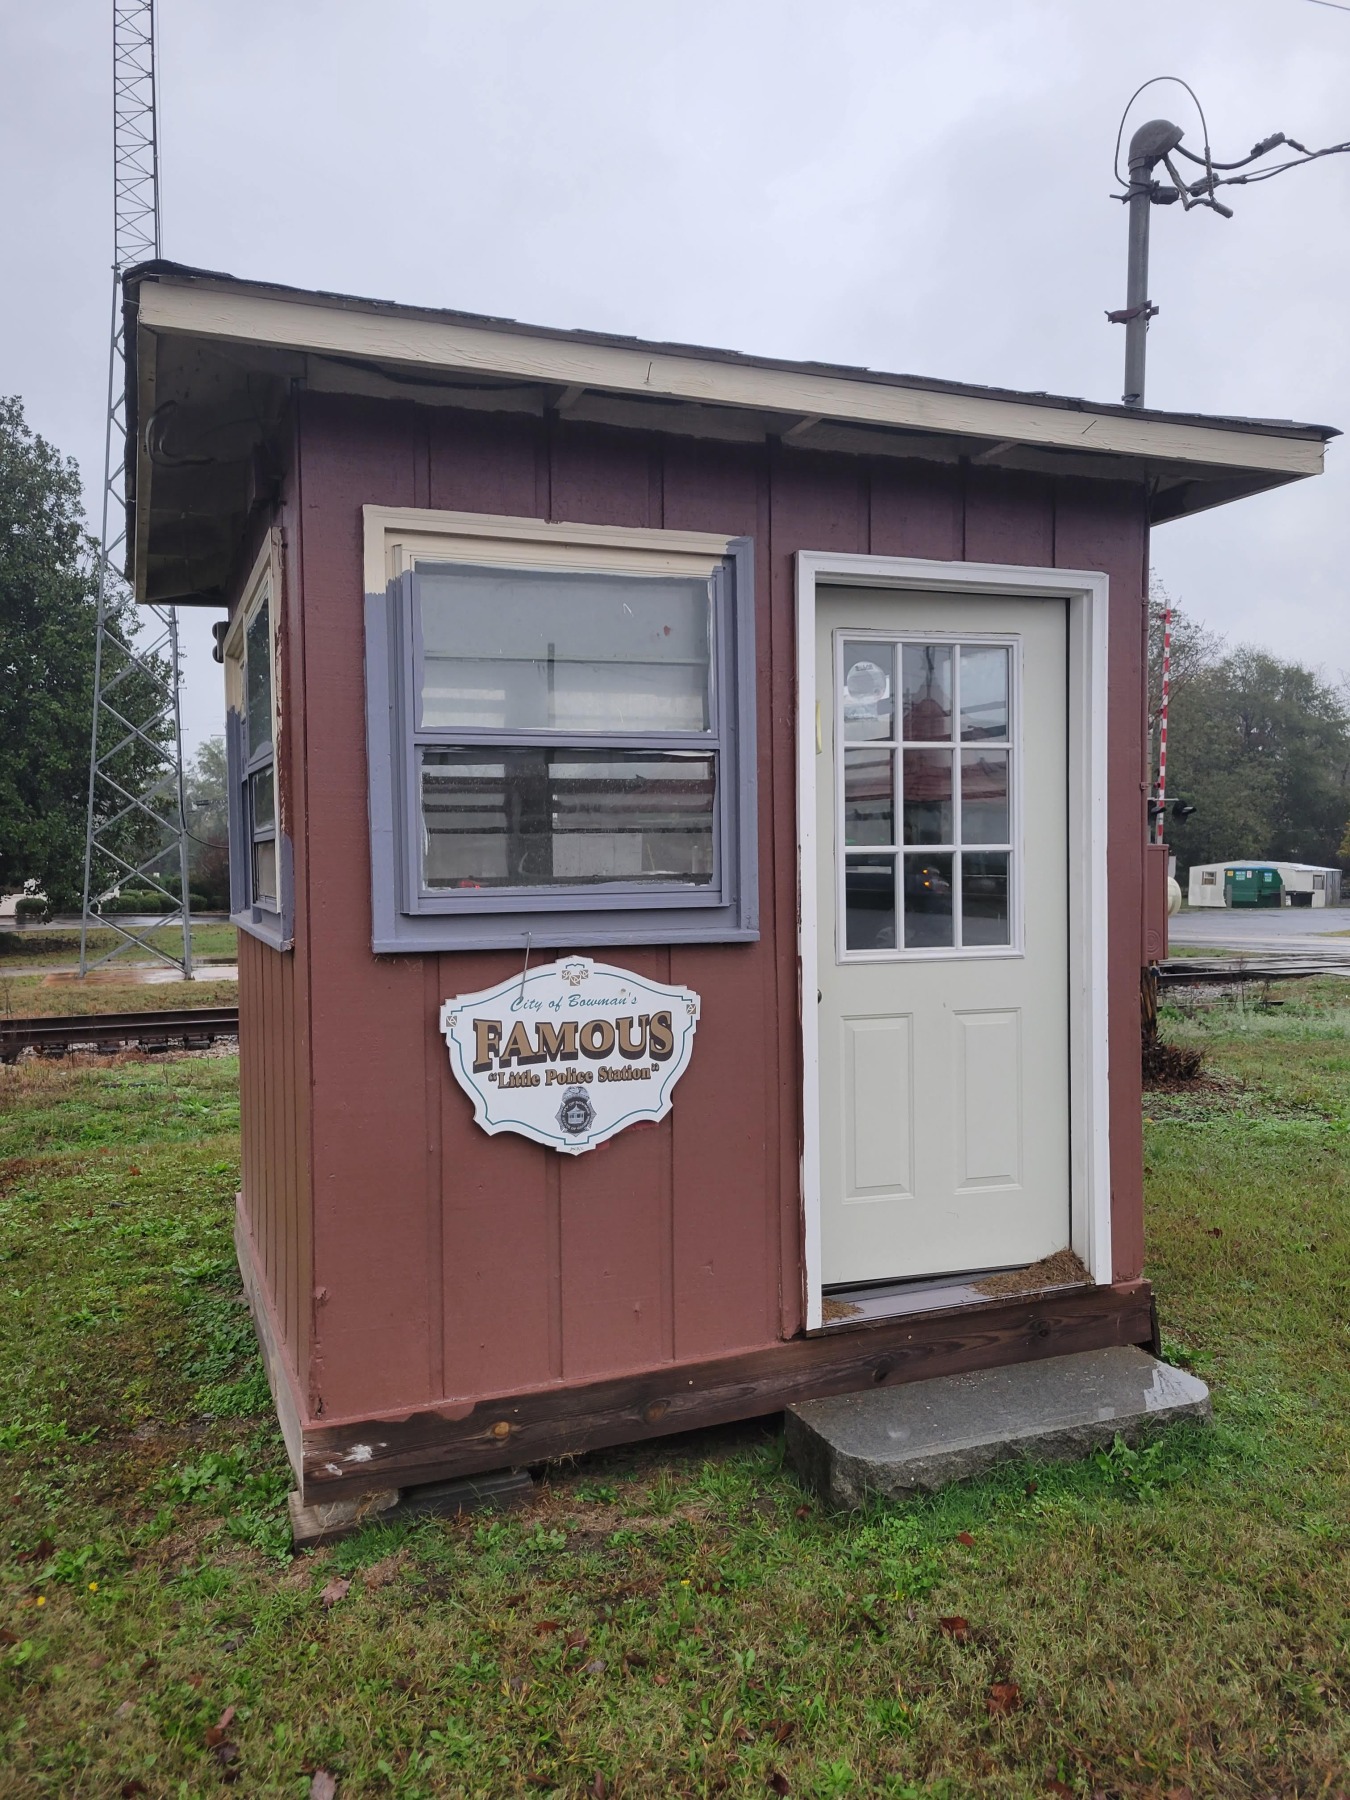 Bowman Georgia Famous Little Police Station Sites to See in Bowman Georgia